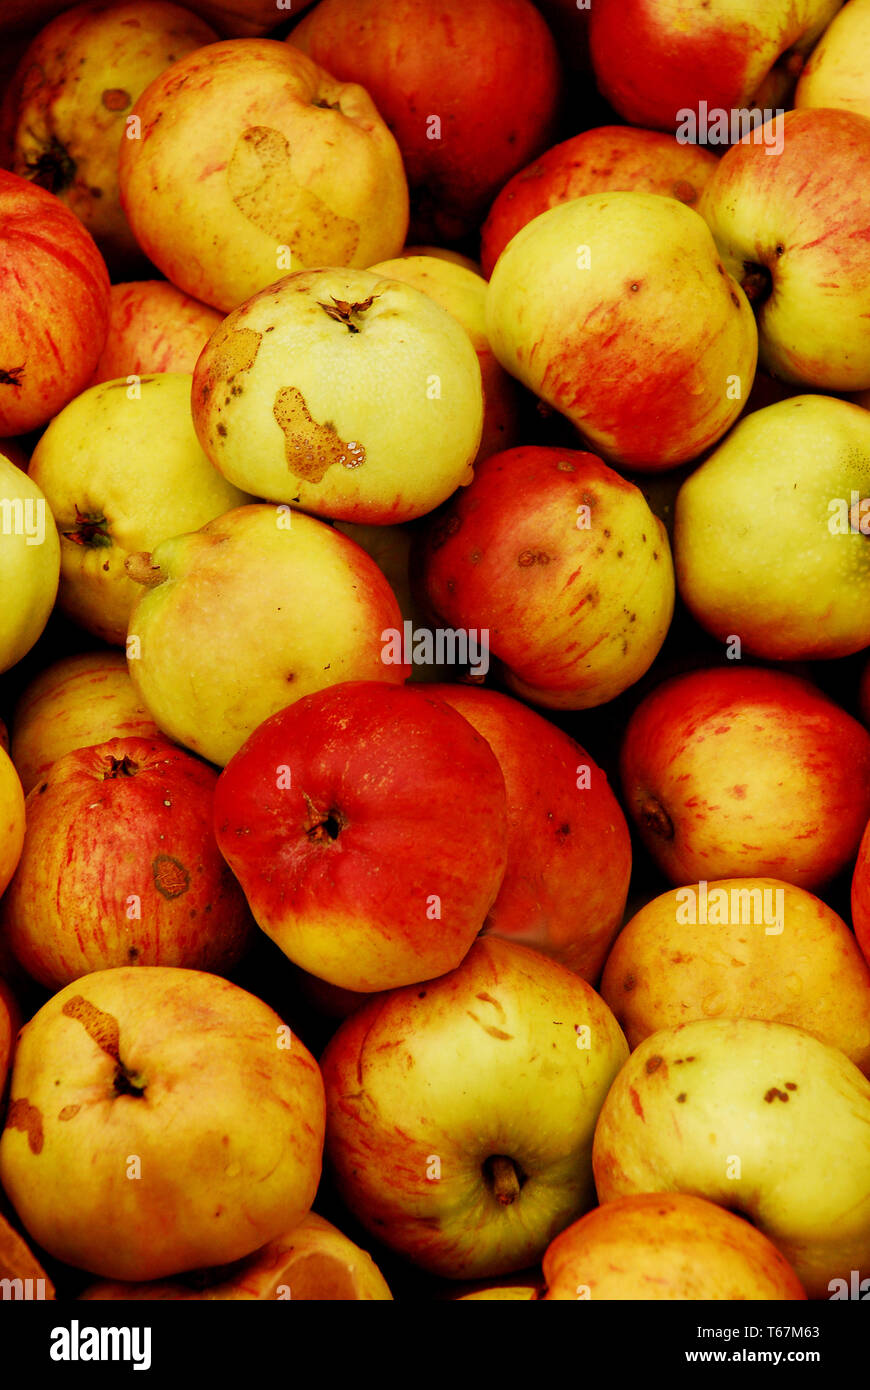 Imperfect and Slightly Bruised Apples Stock Photo